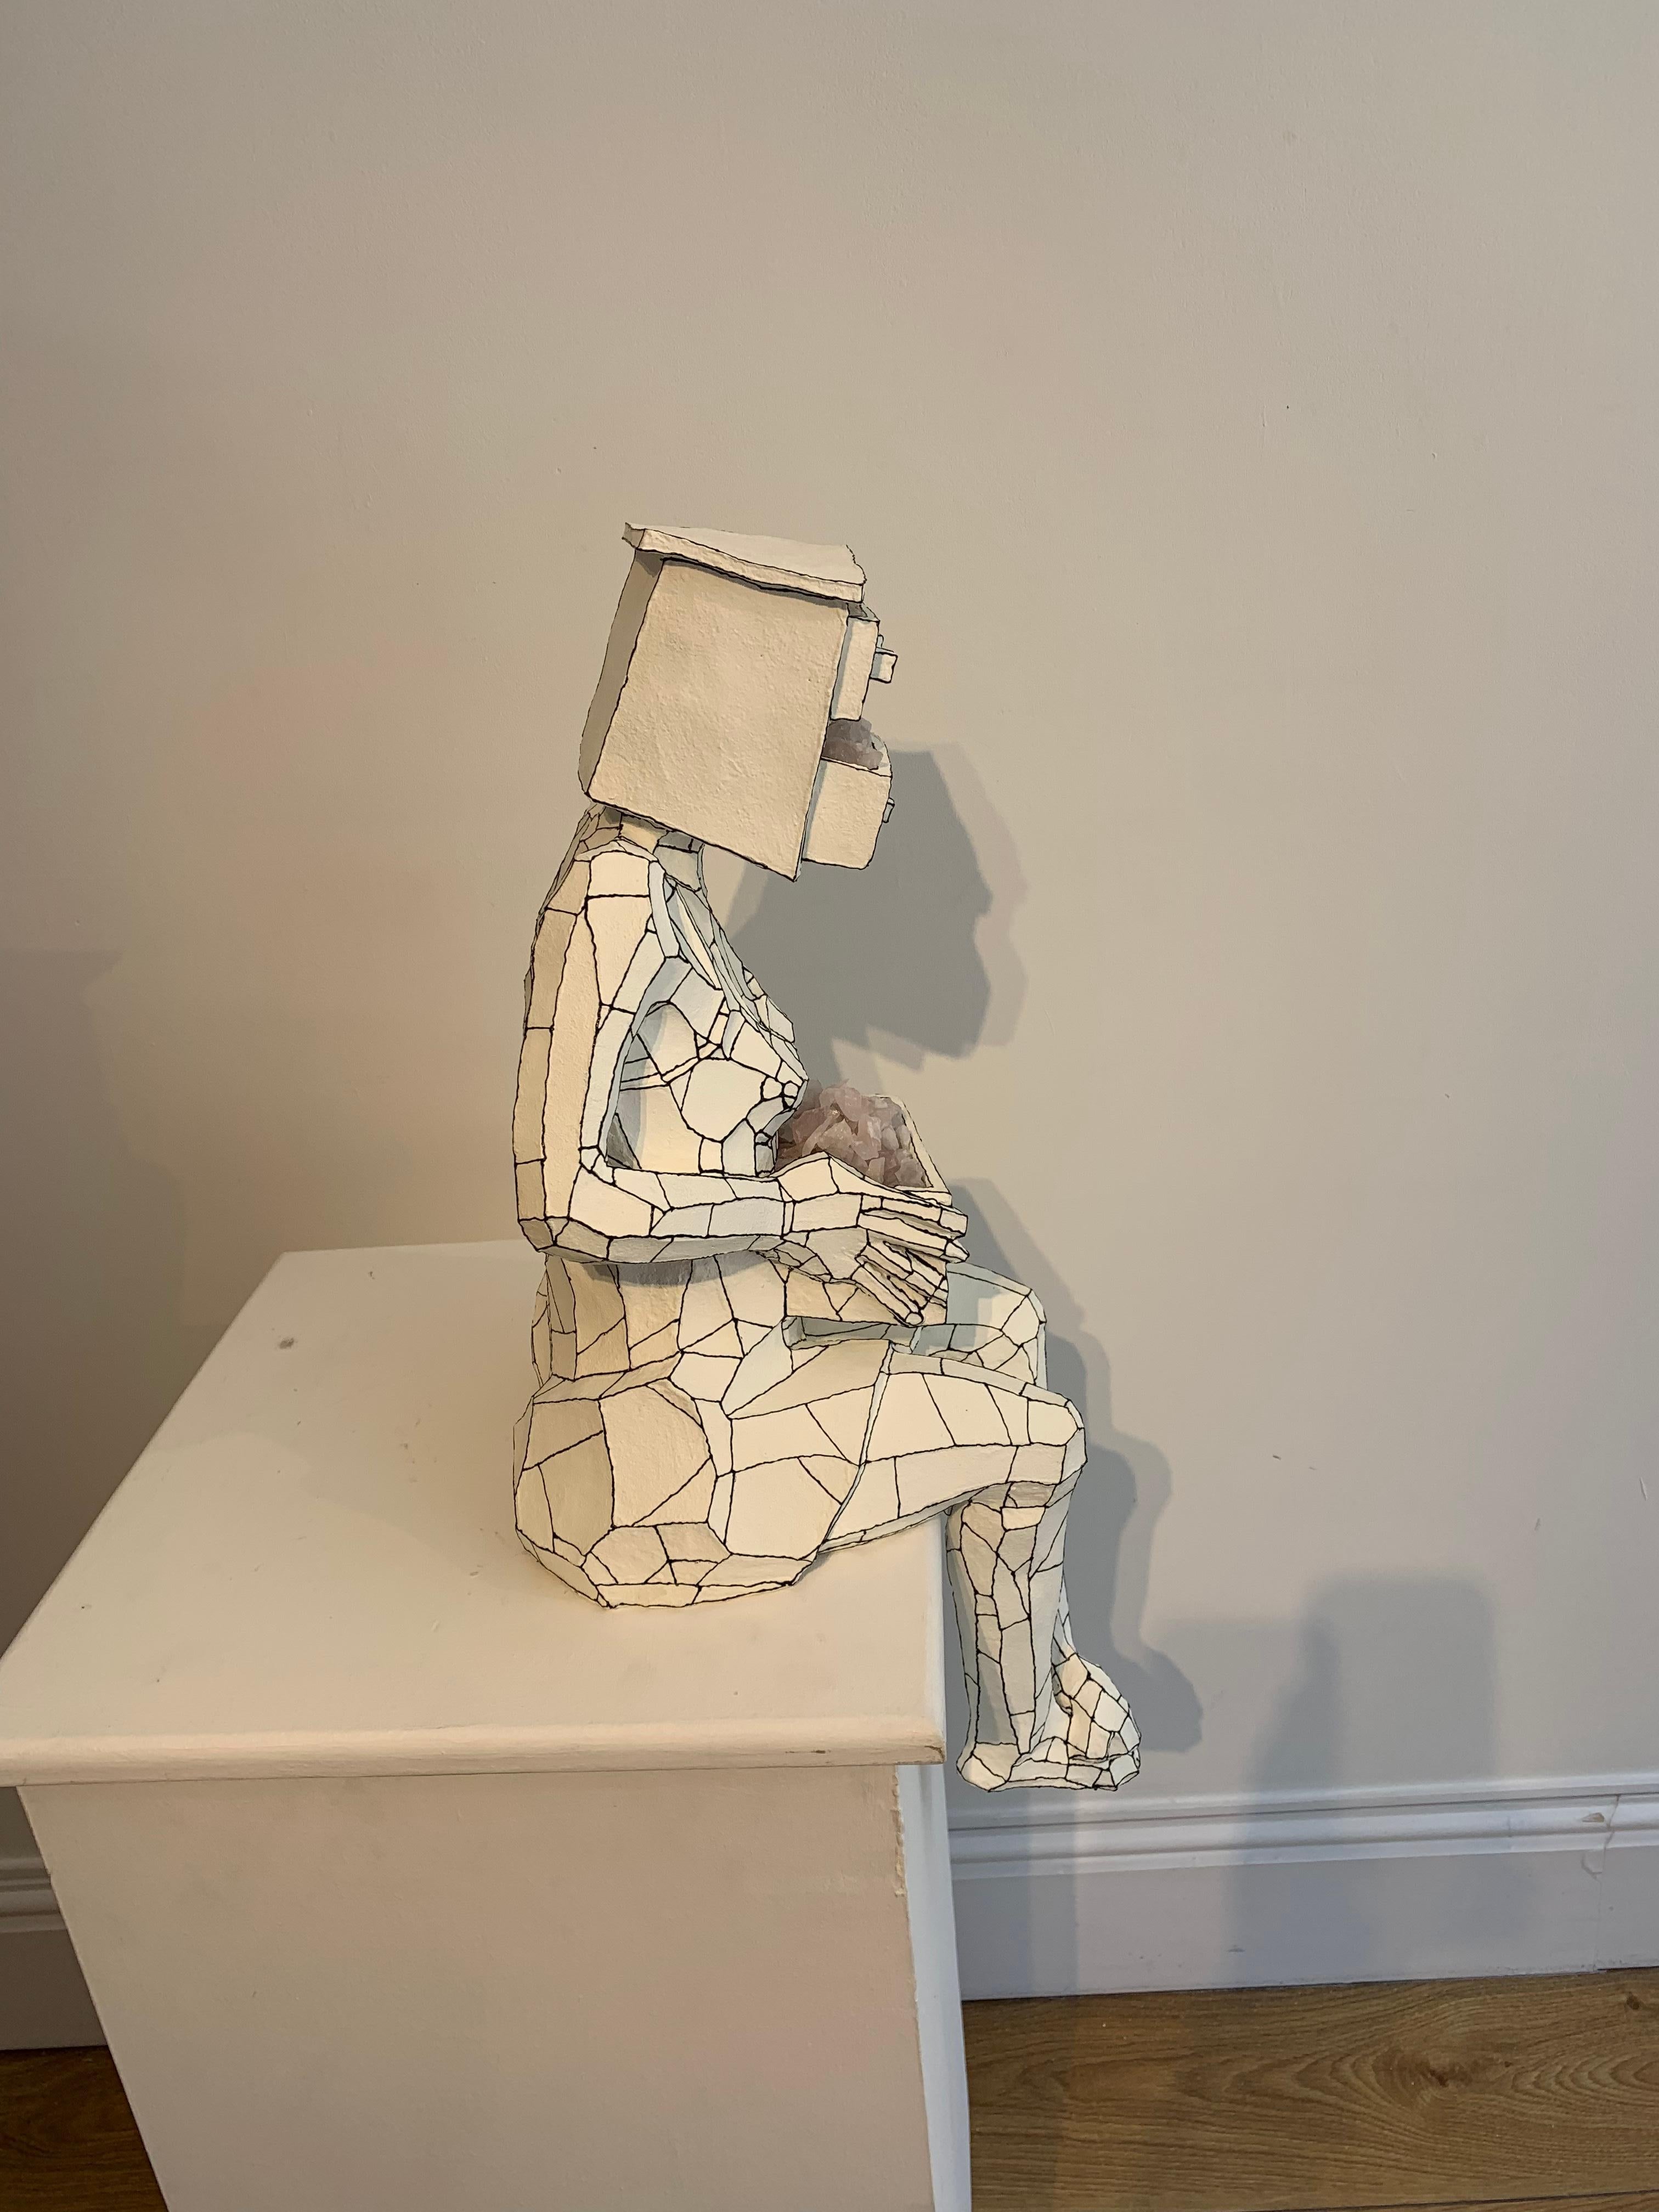 Woman with Drawers by Gary Betts, resin. 66cm high, 25cm wide, 39cm deep.  

Gary Betts is an English Sculptor, based in West London, currently working on a barge on the Thames. He first discovered his talent for ceramics and sculpture at school, so